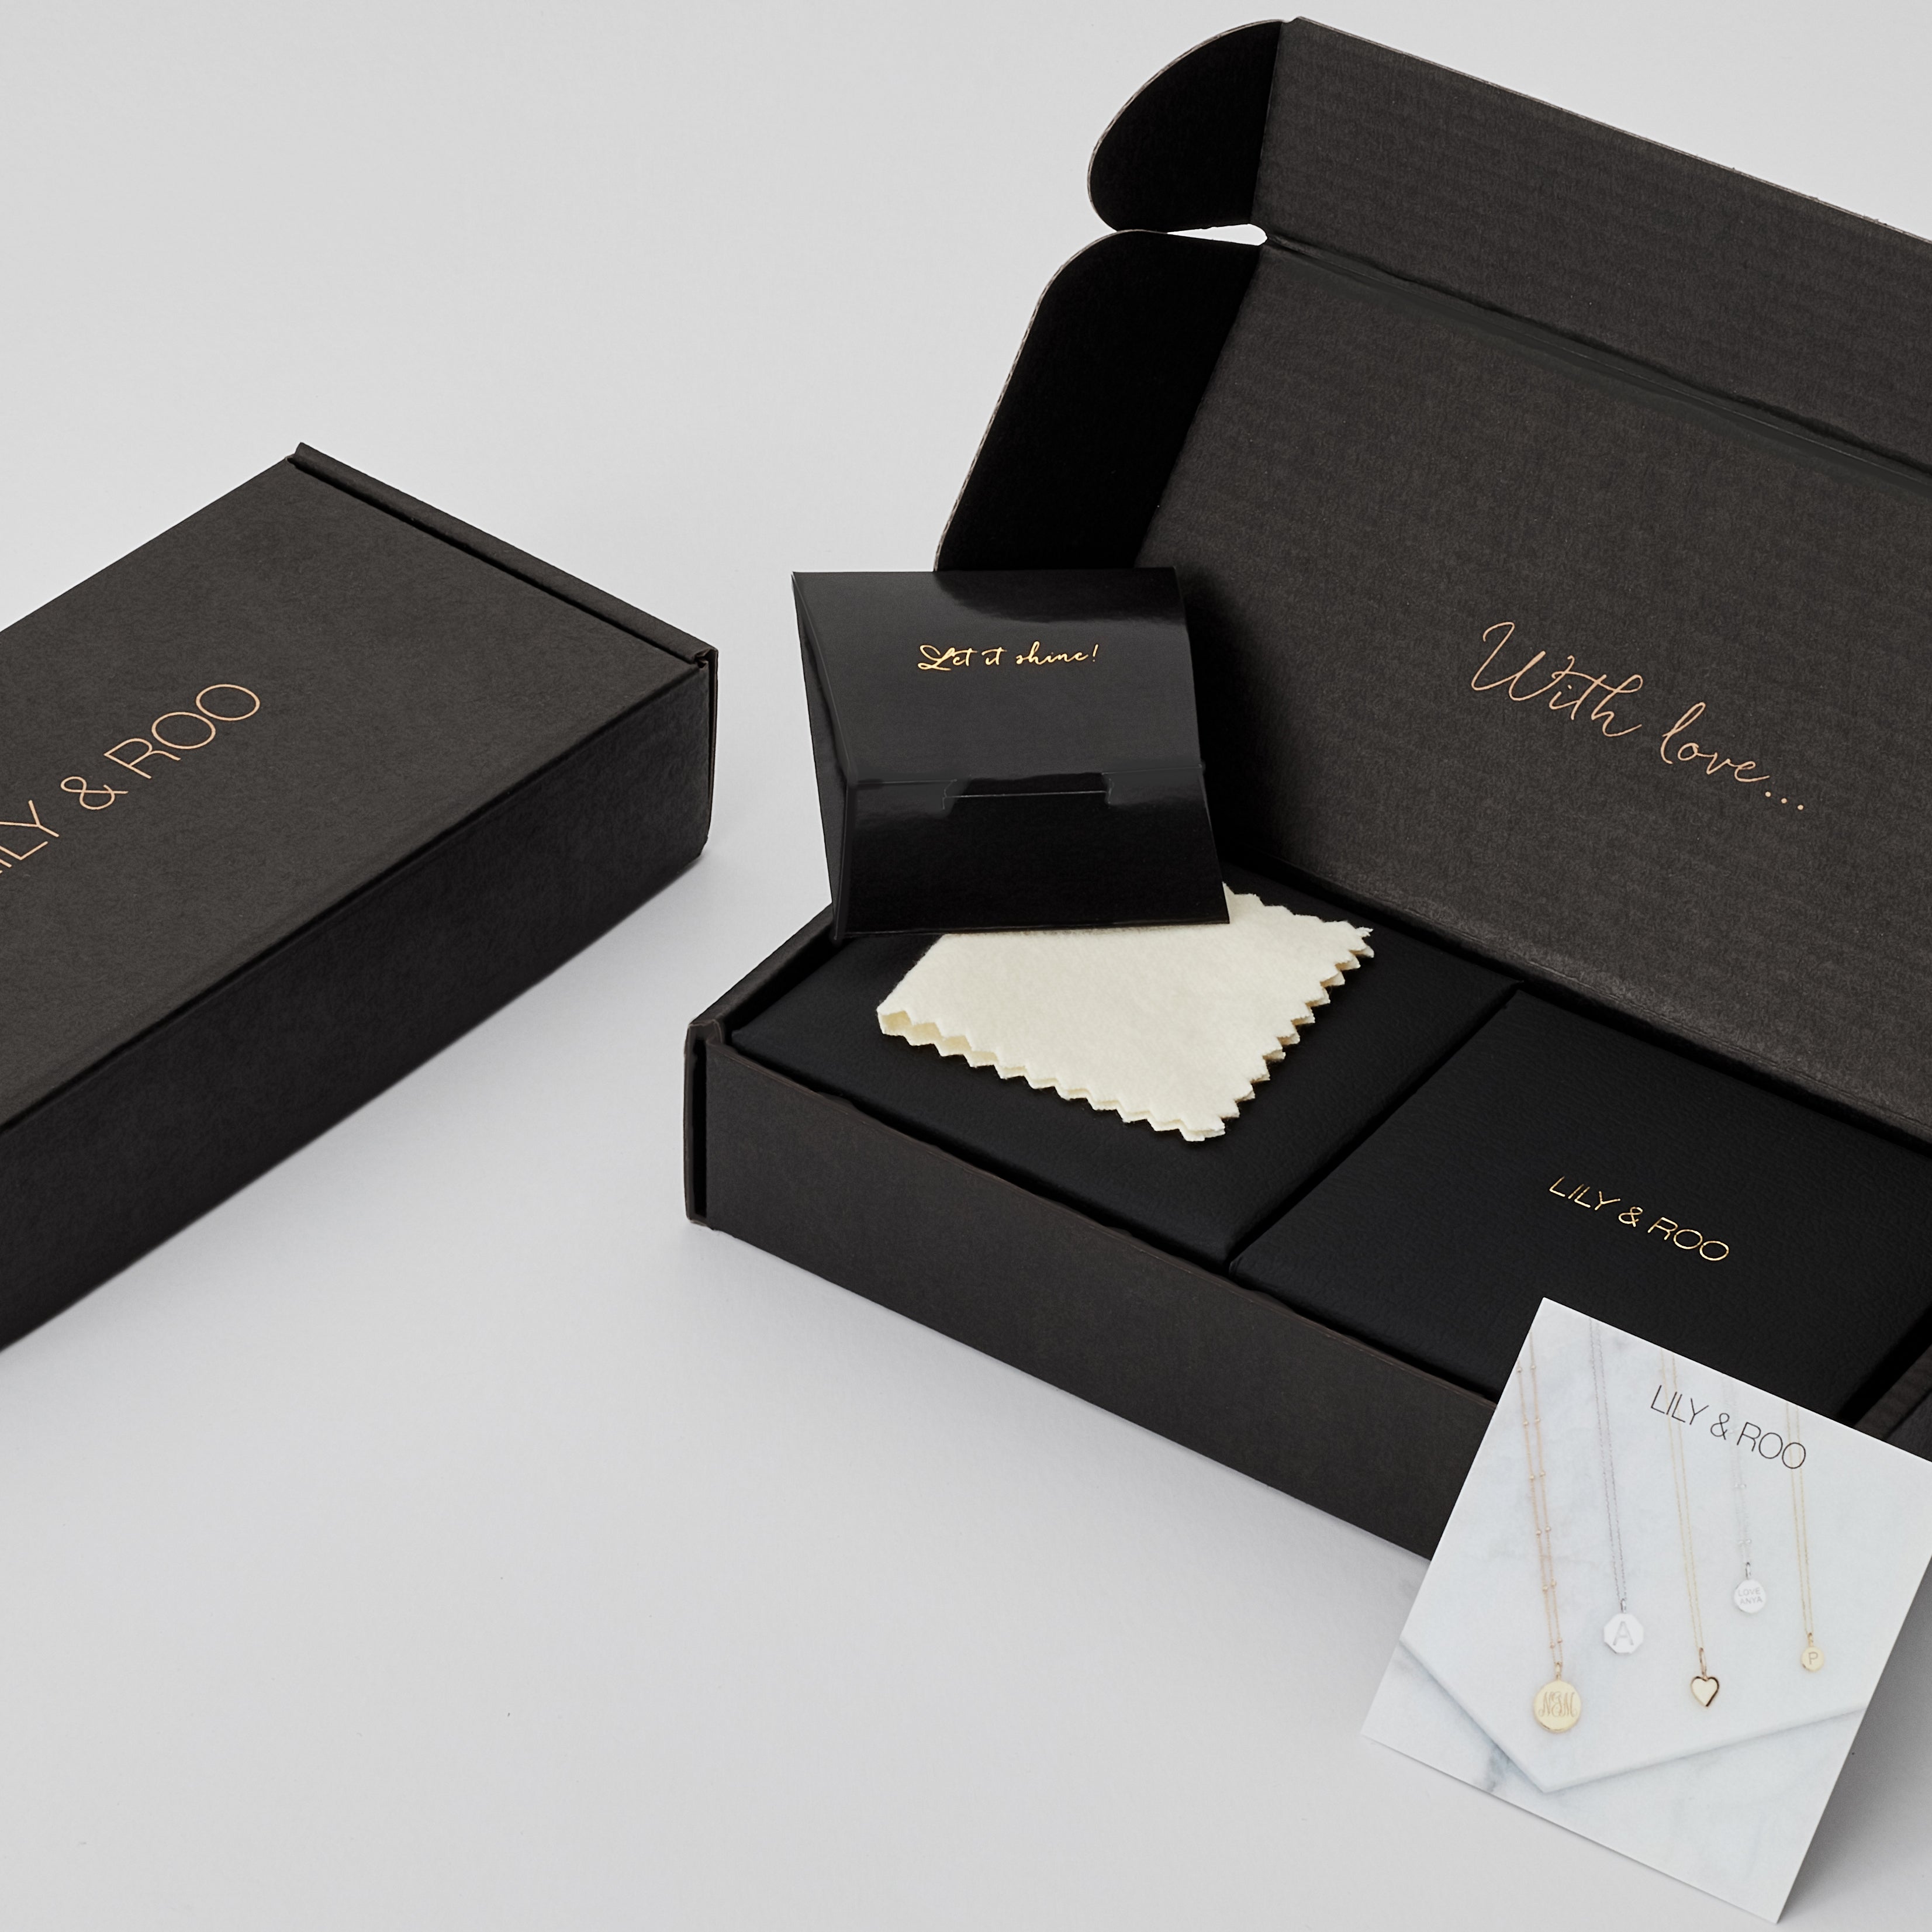 Lily and Roo jewellery gift wrapping boxes in black